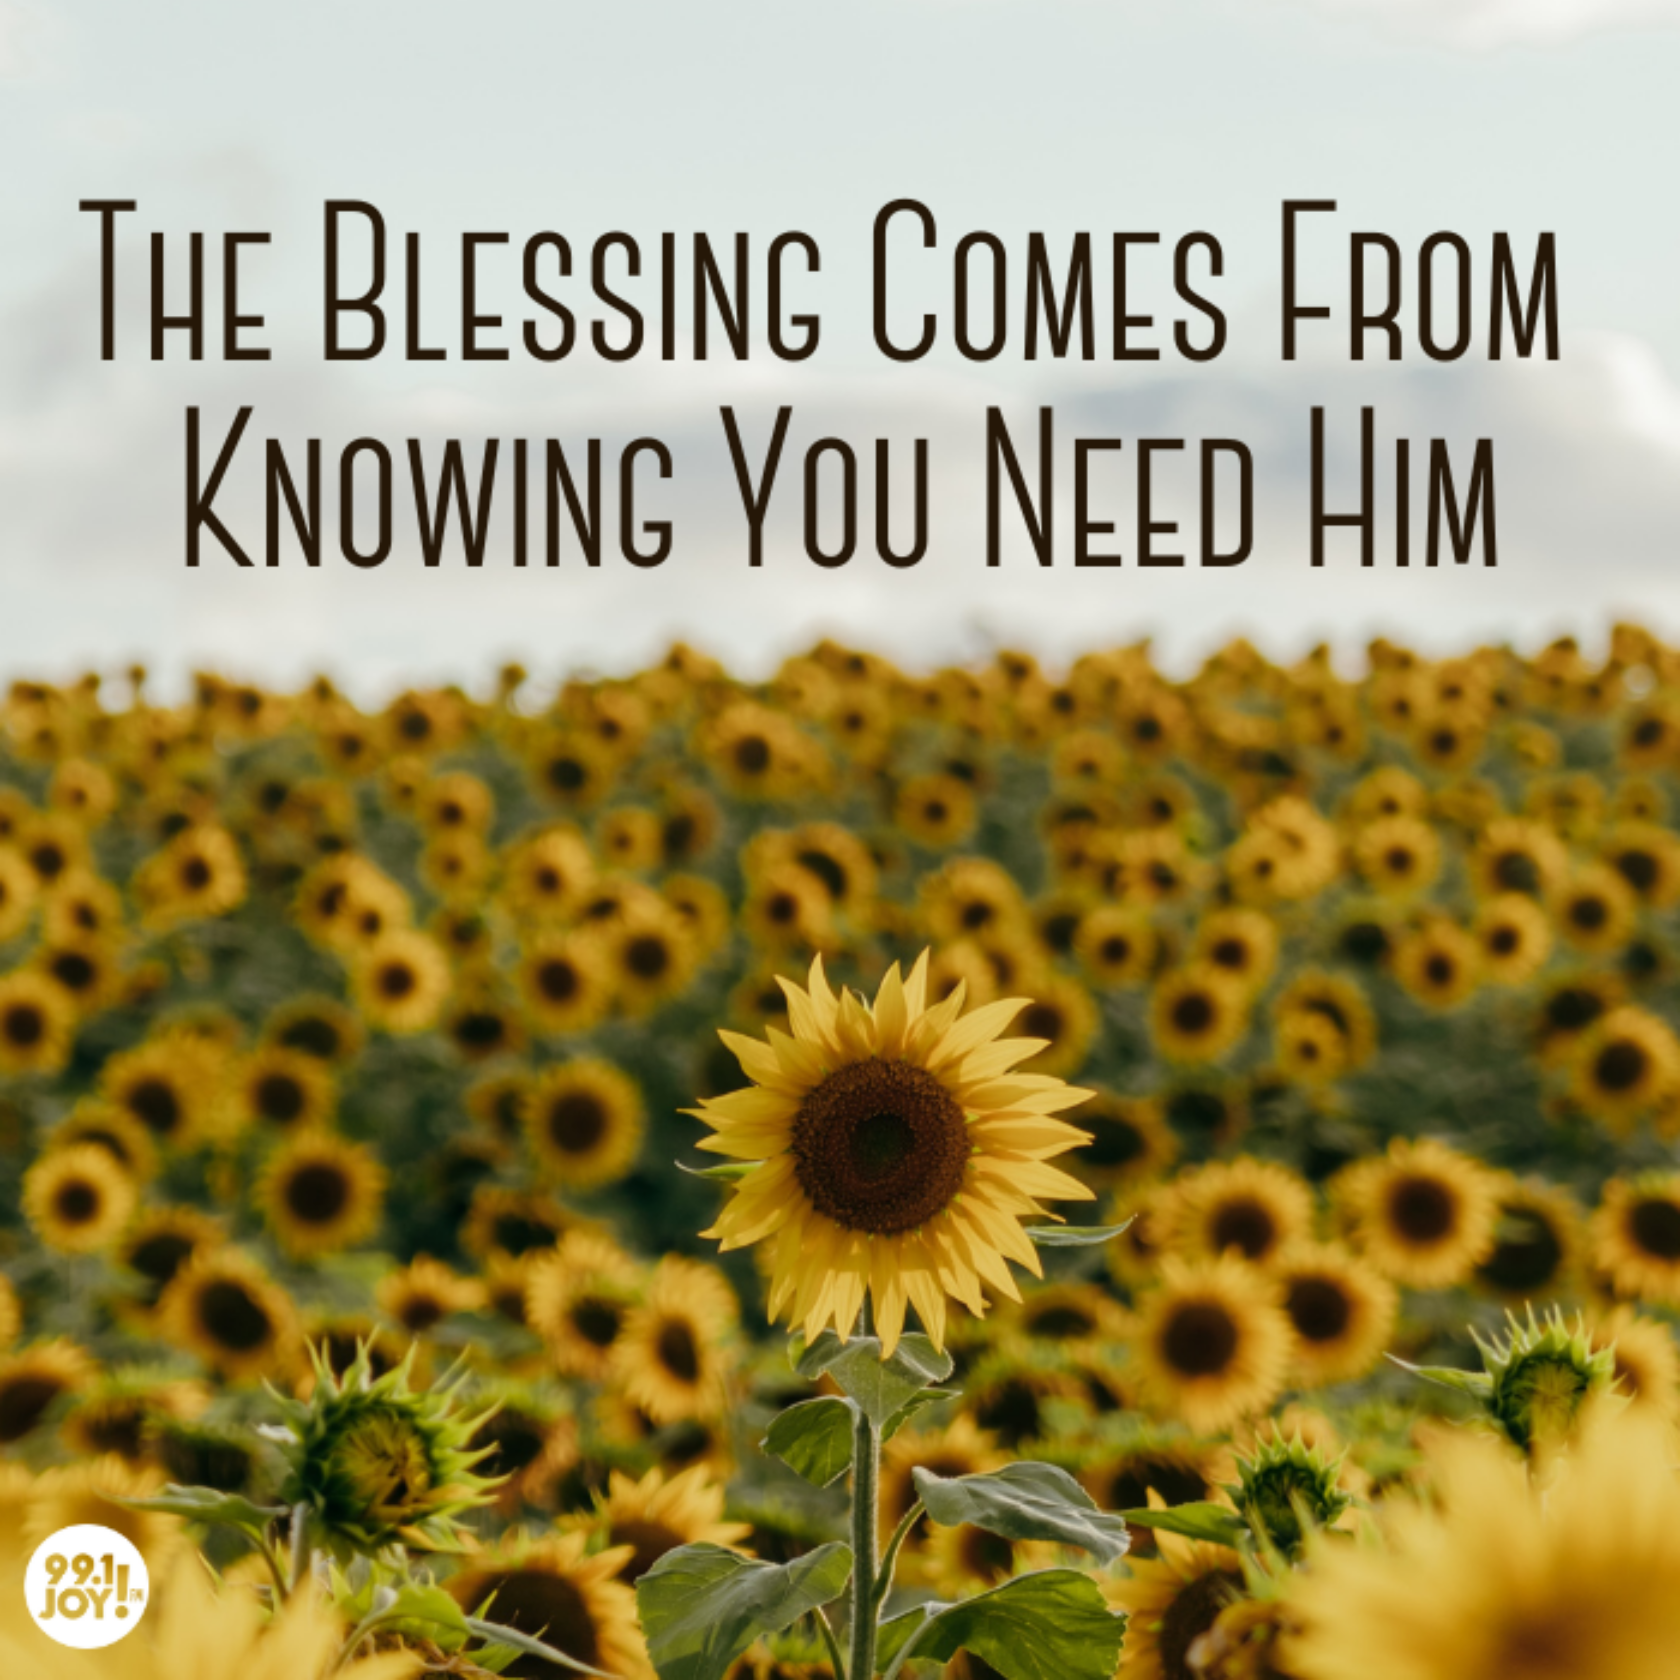 The Blessing Comes From Knowing You Need Him